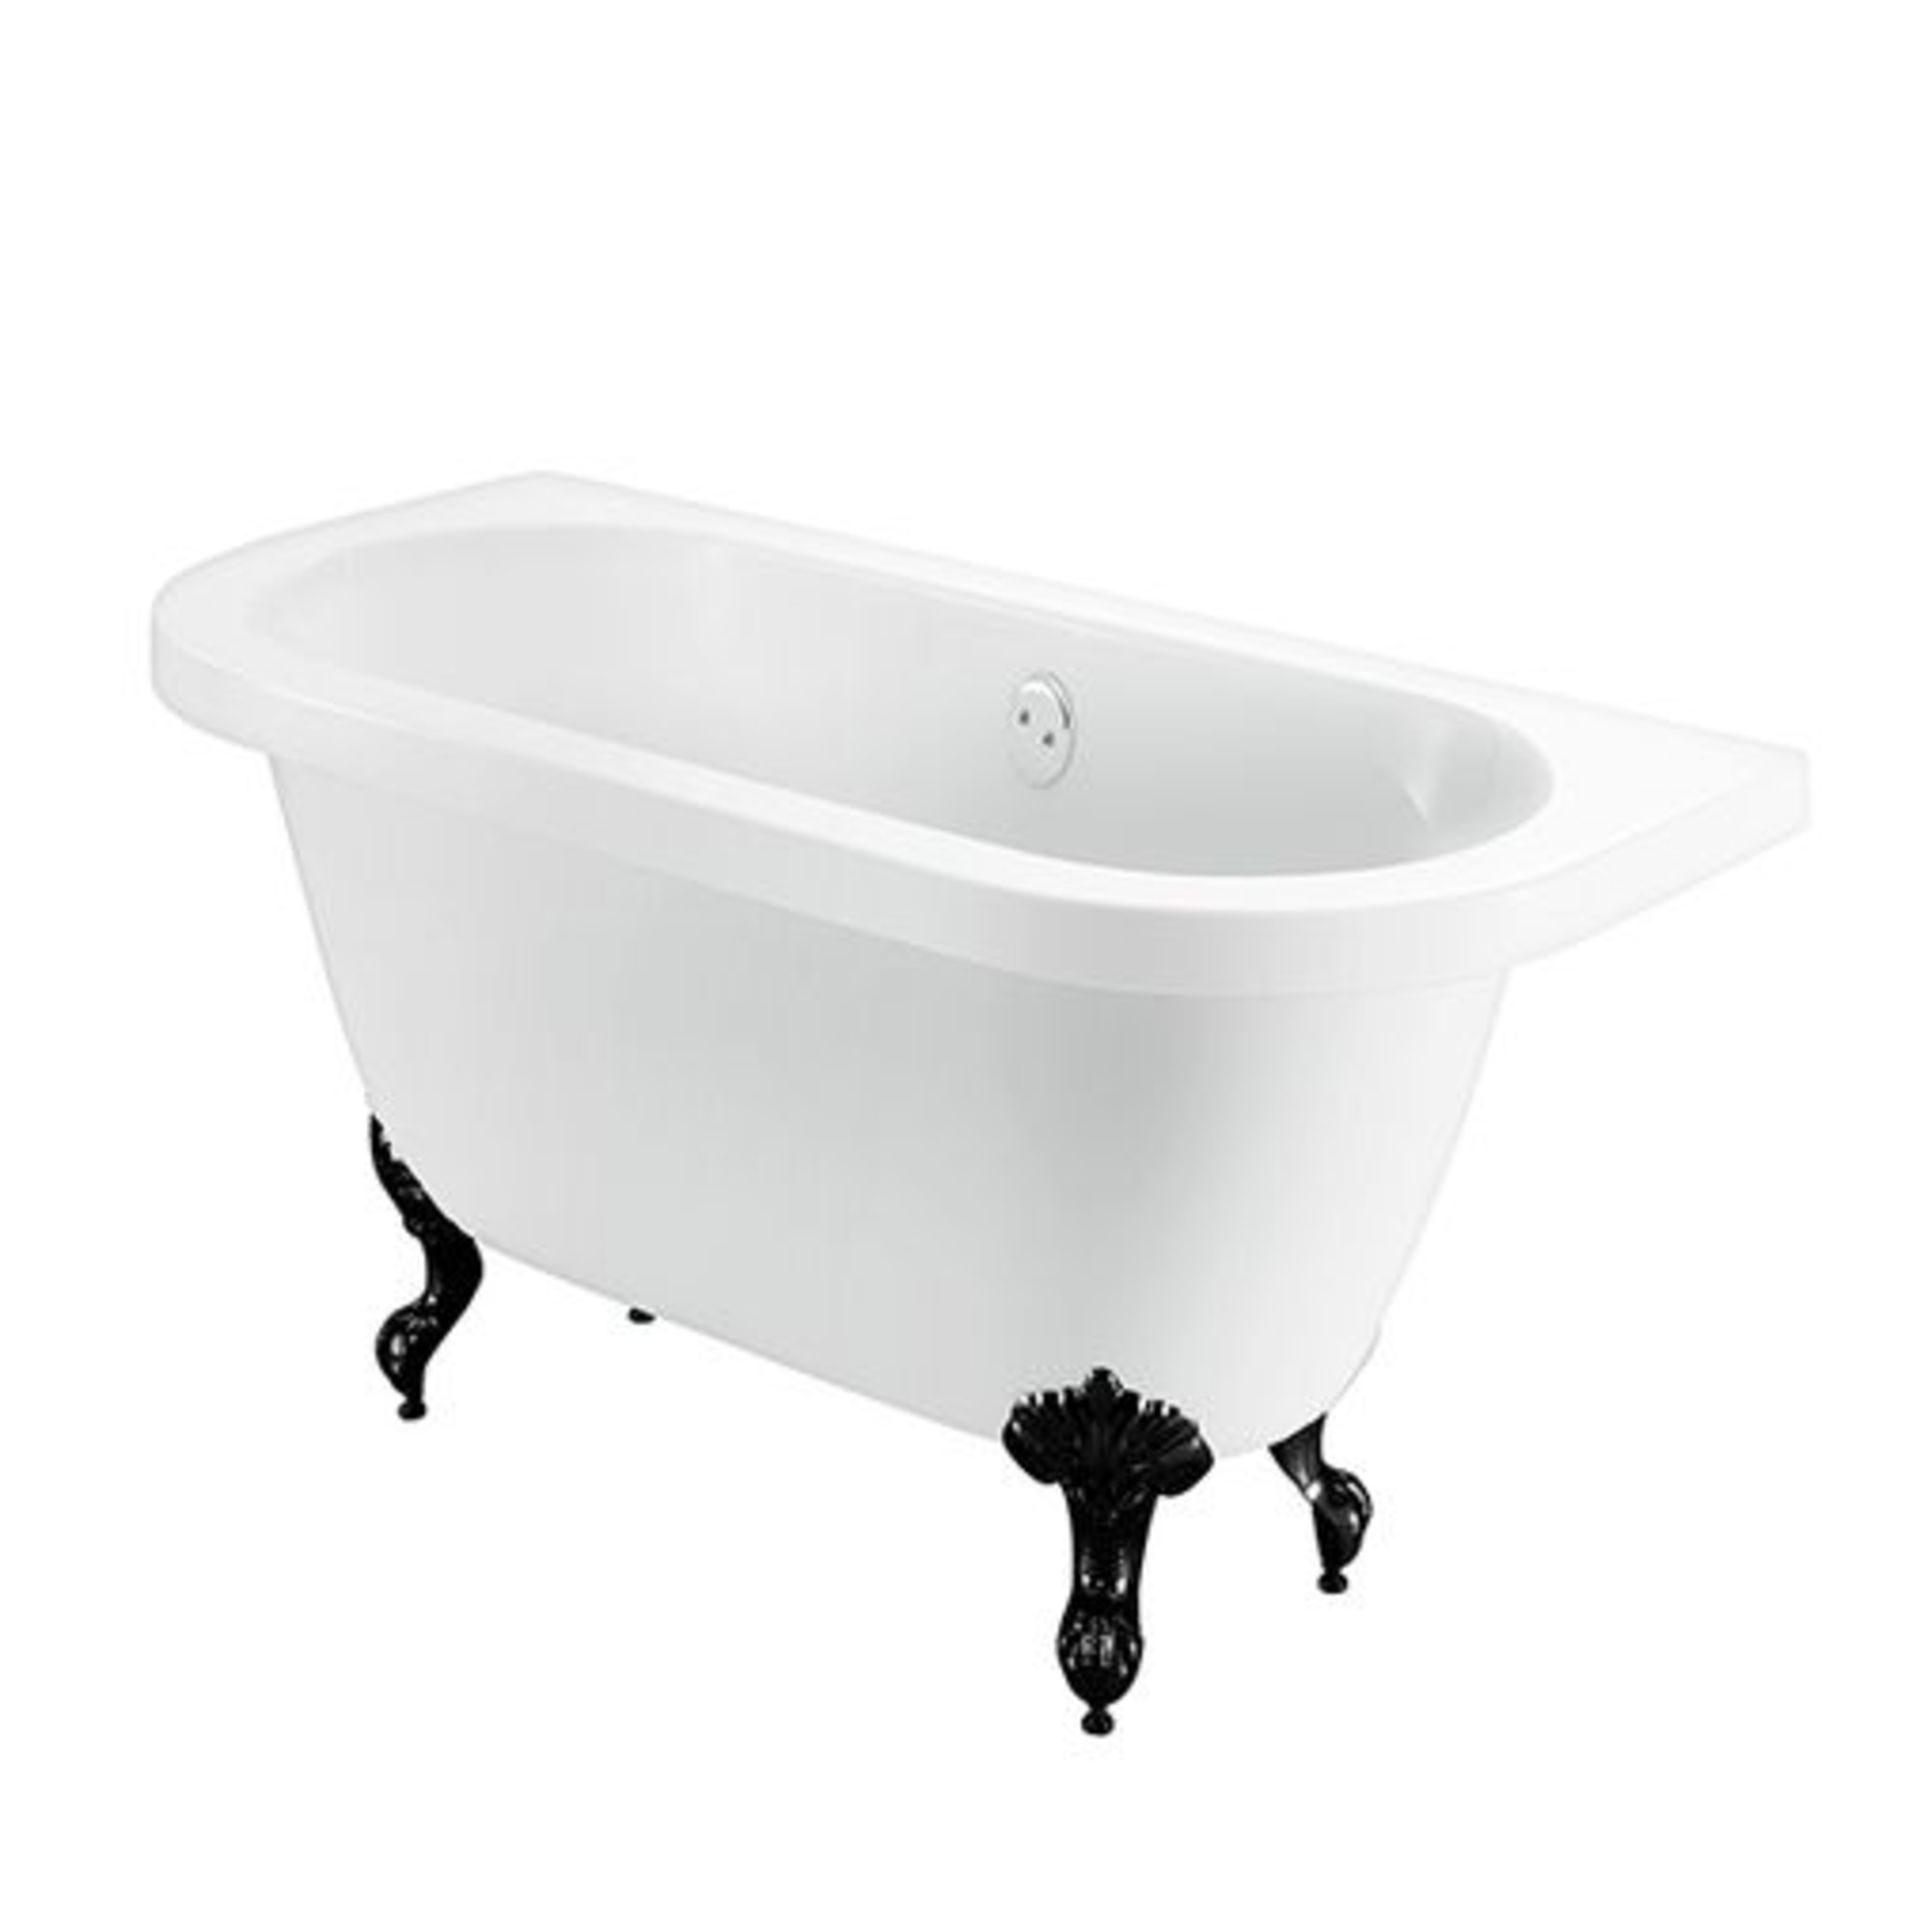 BATHSTORE BELMONT 1700X770 DOUBLE ENDED BACK TO WALL FREE STANDING BATH WITH BALL & CLAWFEET. RRP £ - Image 2 of 2